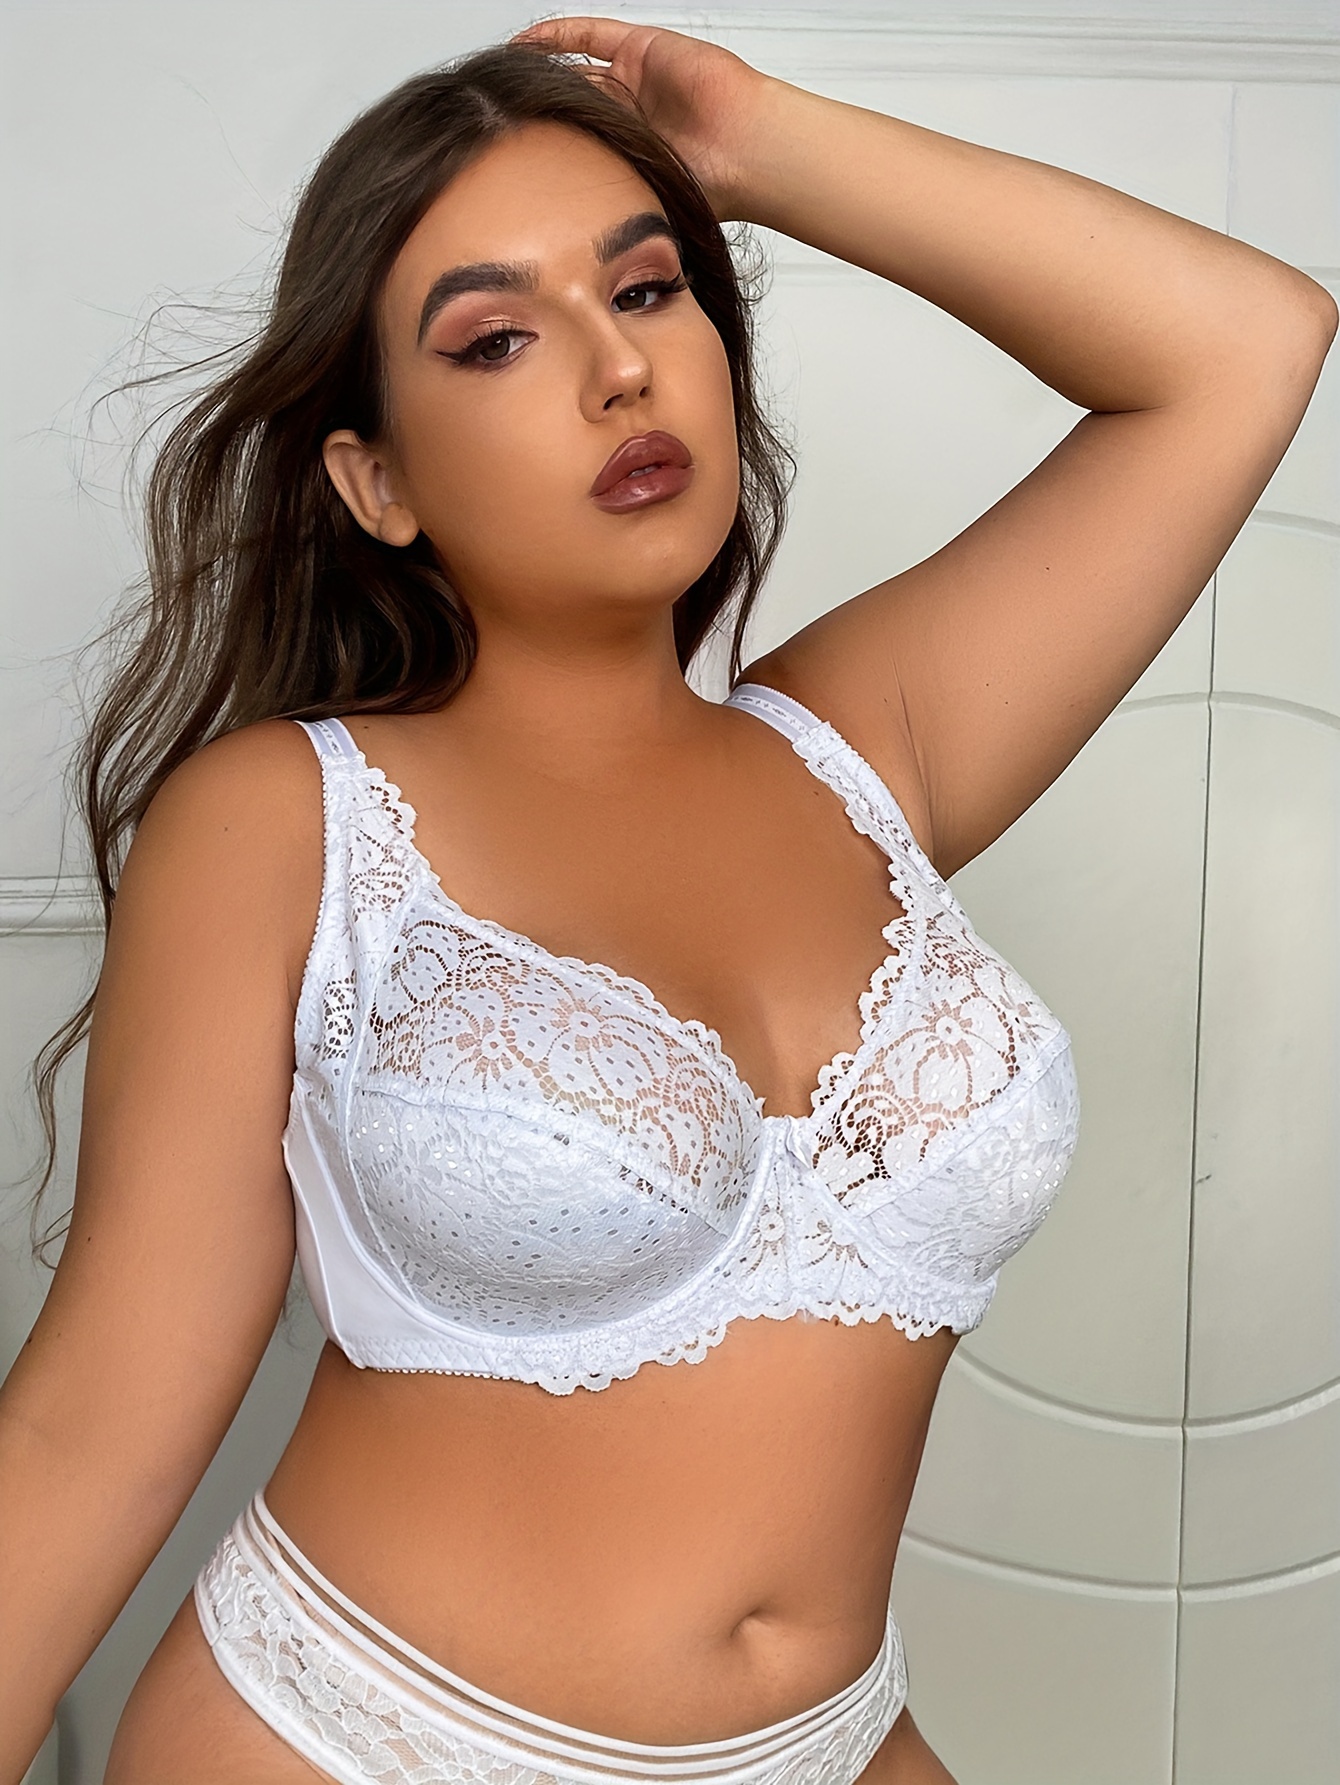 Ultra Thin Plus Size Bridal Bra Sets For Women Big Breasts Top Female  Underwire Bridal Bra Setssiere Womens Underwear Bridal Bra Set Push Up Lace  Sexy Lingerie 210623 From Dou01, $9.33